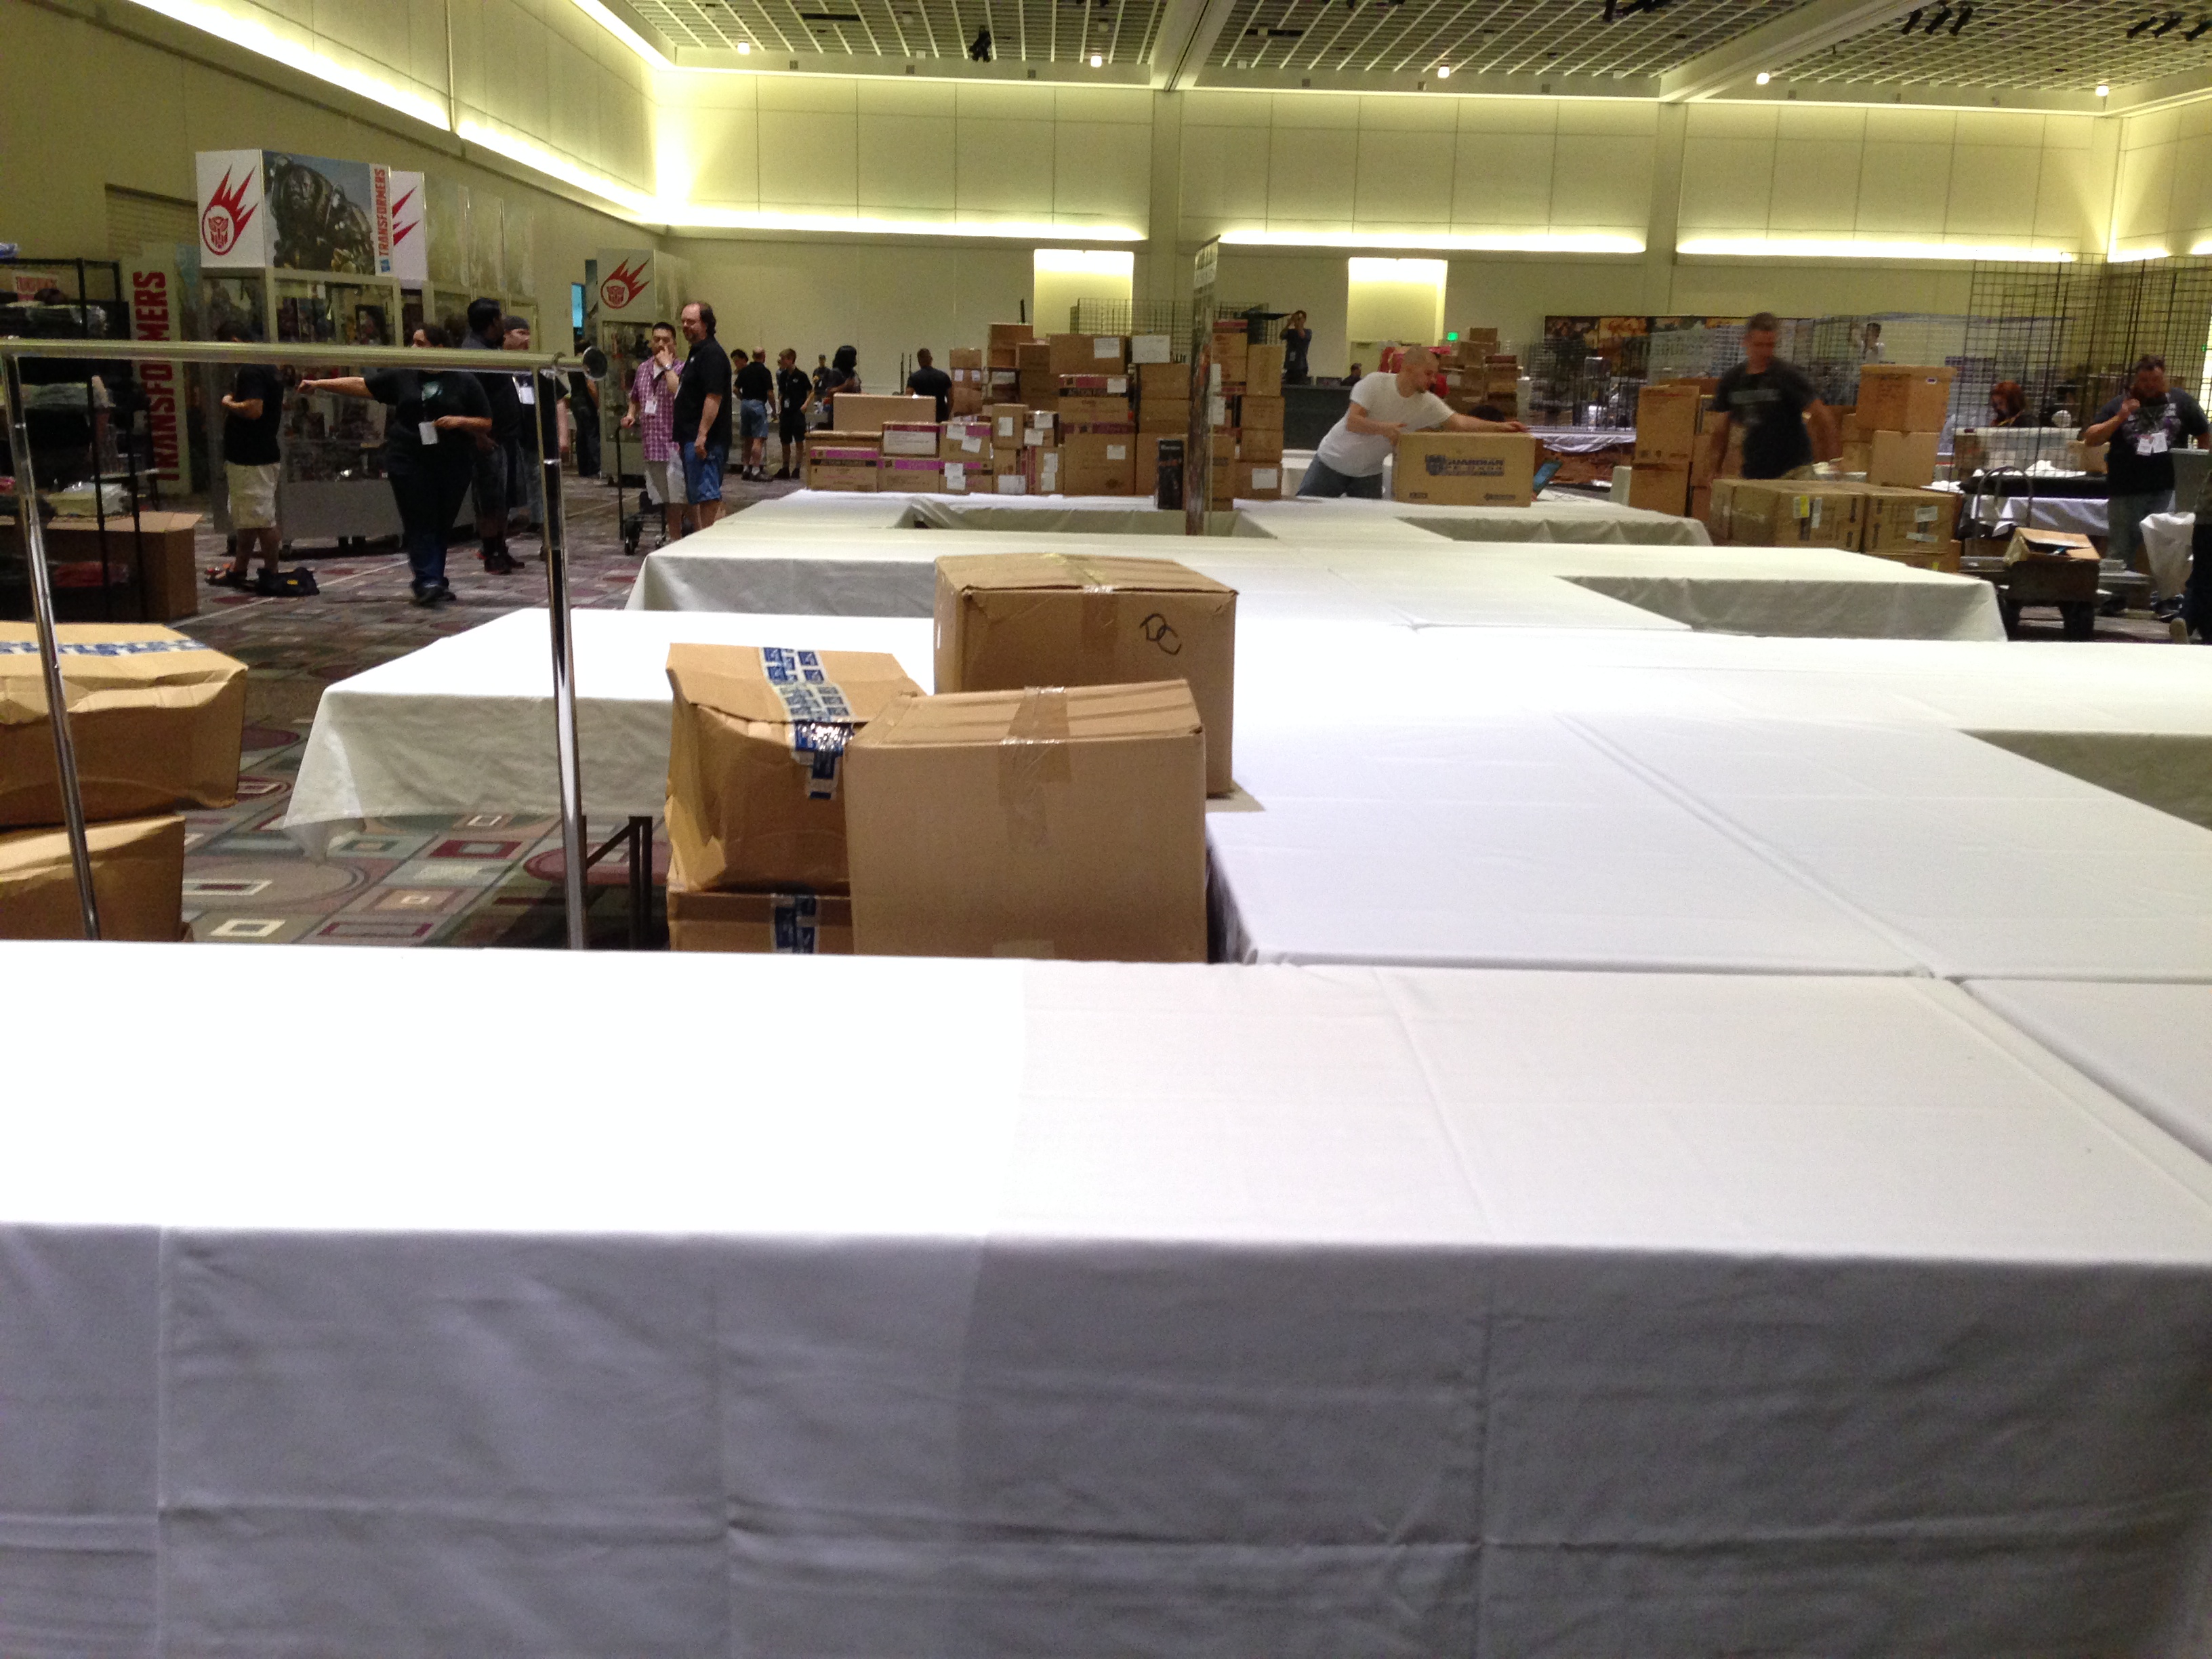 The dealer's room being set up. (Botcon Day 1)